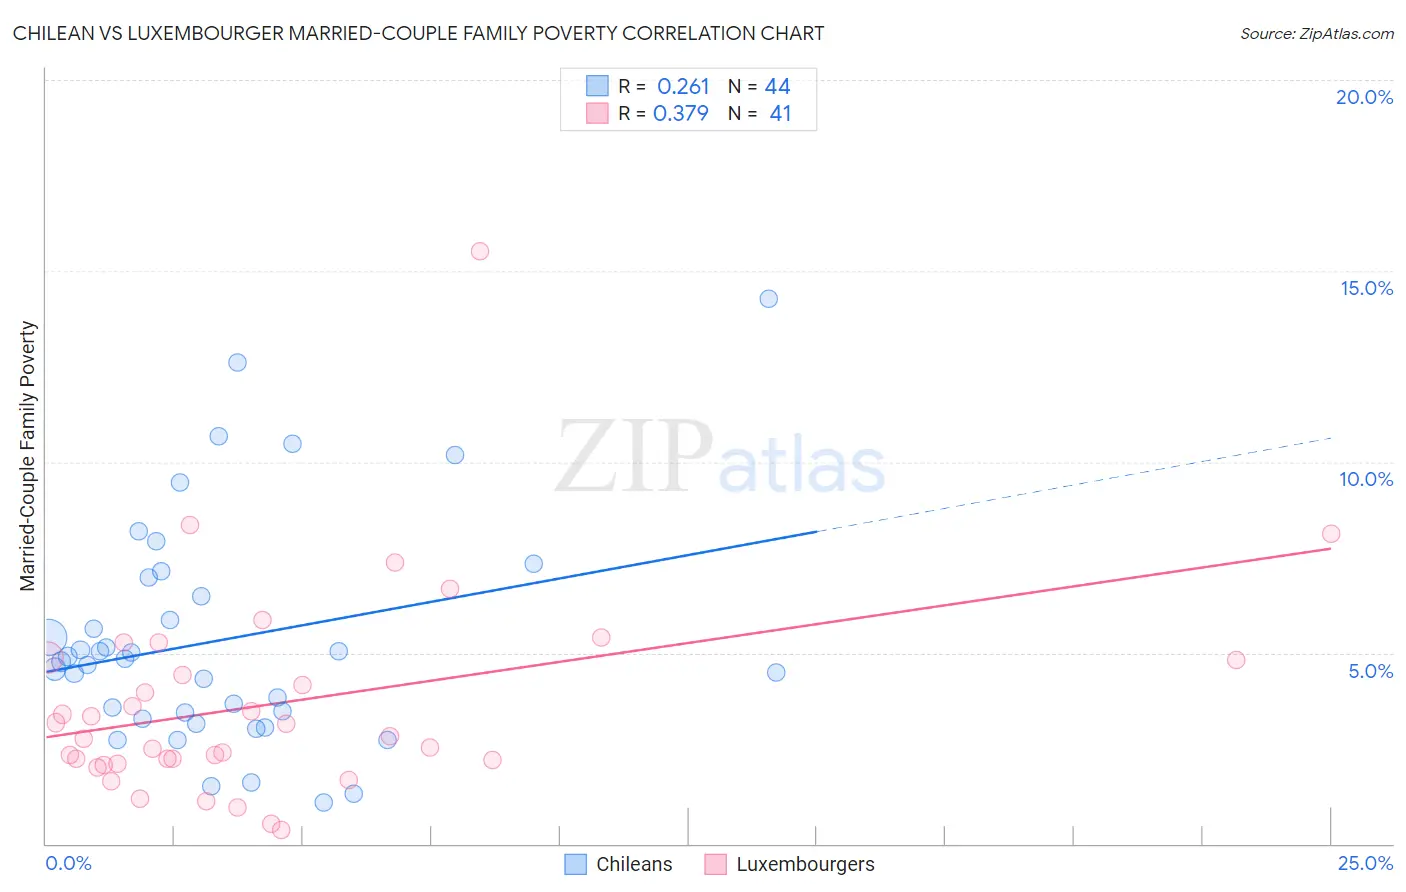 Chilean vs Luxembourger Married-Couple Family Poverty